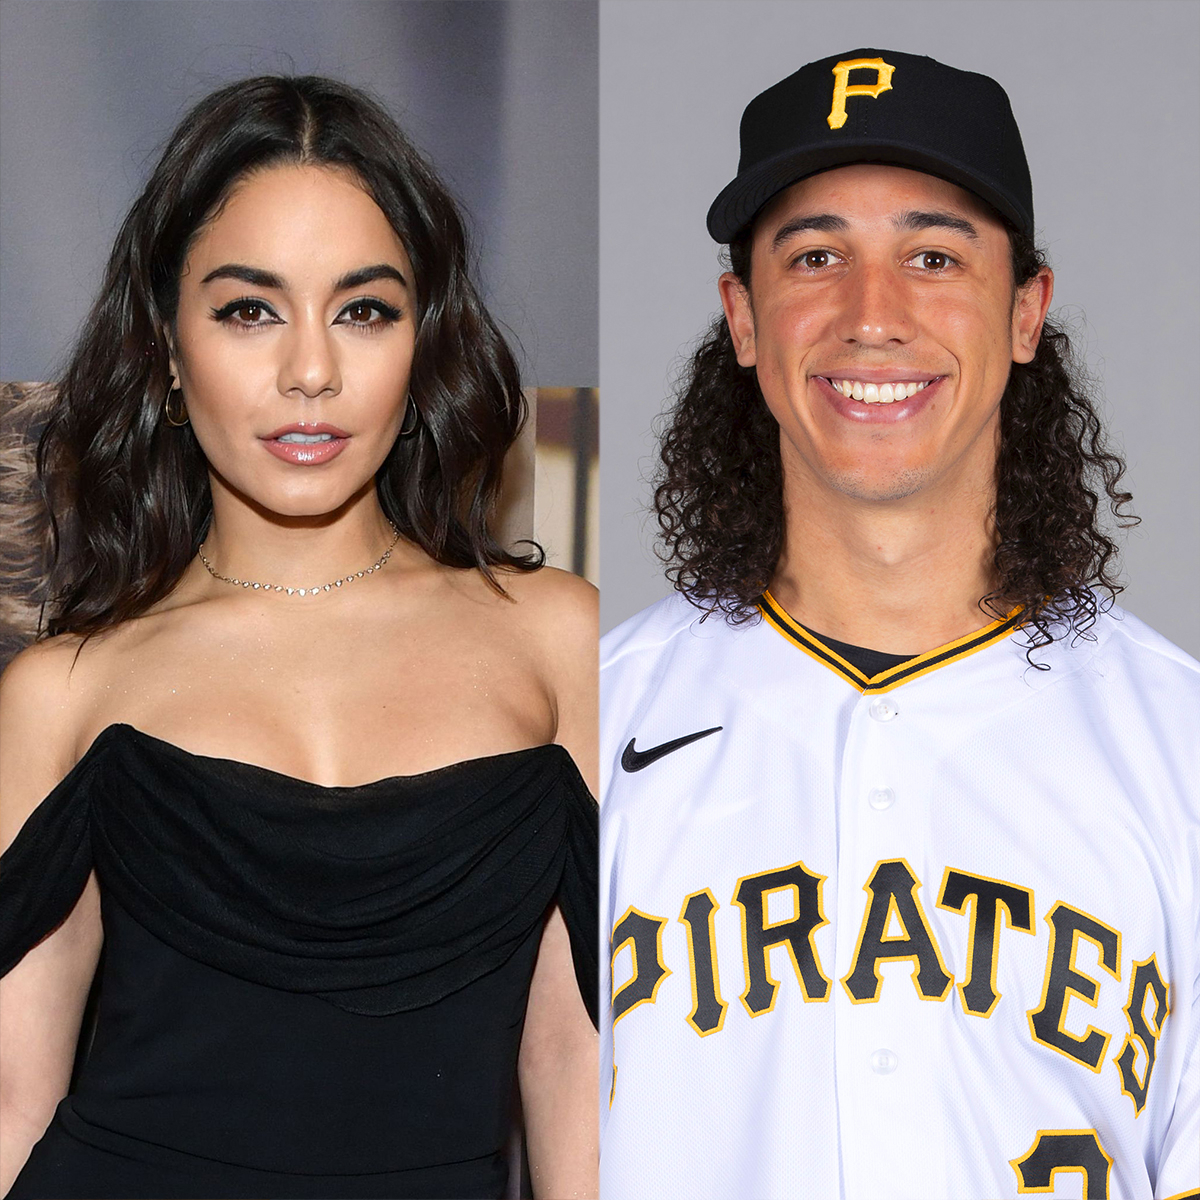 Who Is Cole Tucker? 5 Things About Vanessa Hudgens' Mystery Man